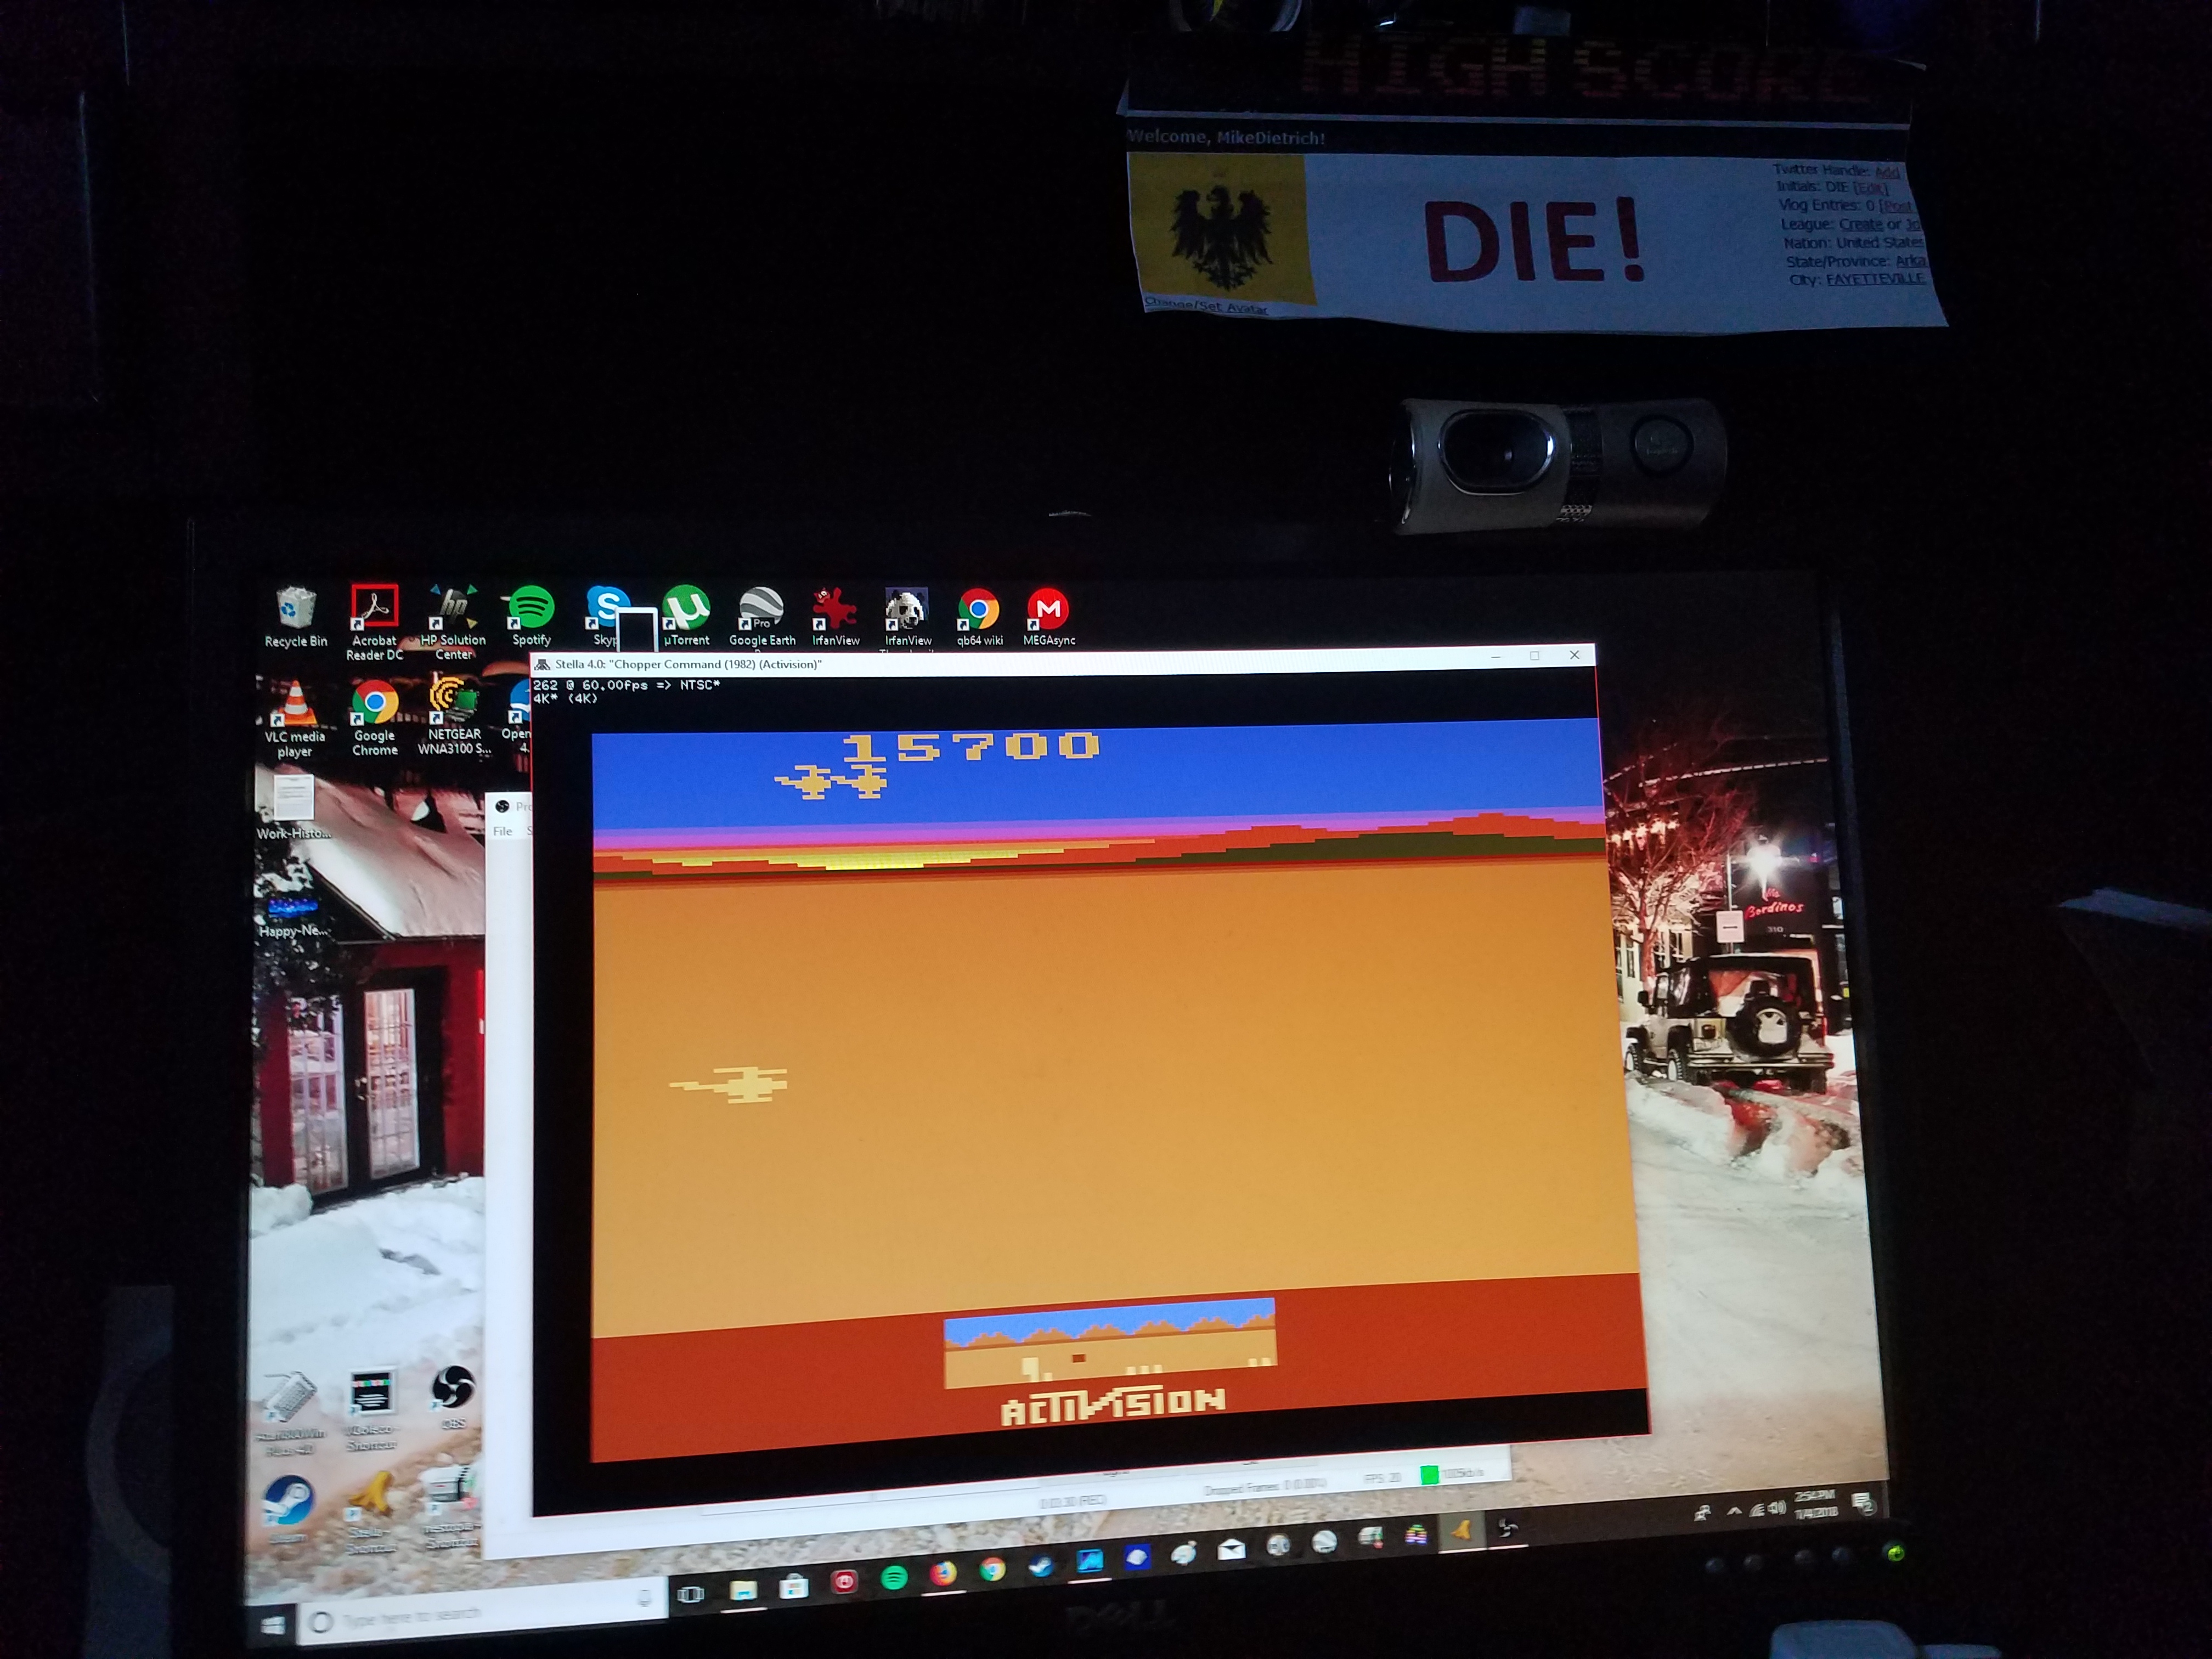 MikeDietrich: Chopper Command [1 Life Only] (Atari 2600 Emulated Novice/B Mode) 15,700 points on 2018-01-04 13:56:19